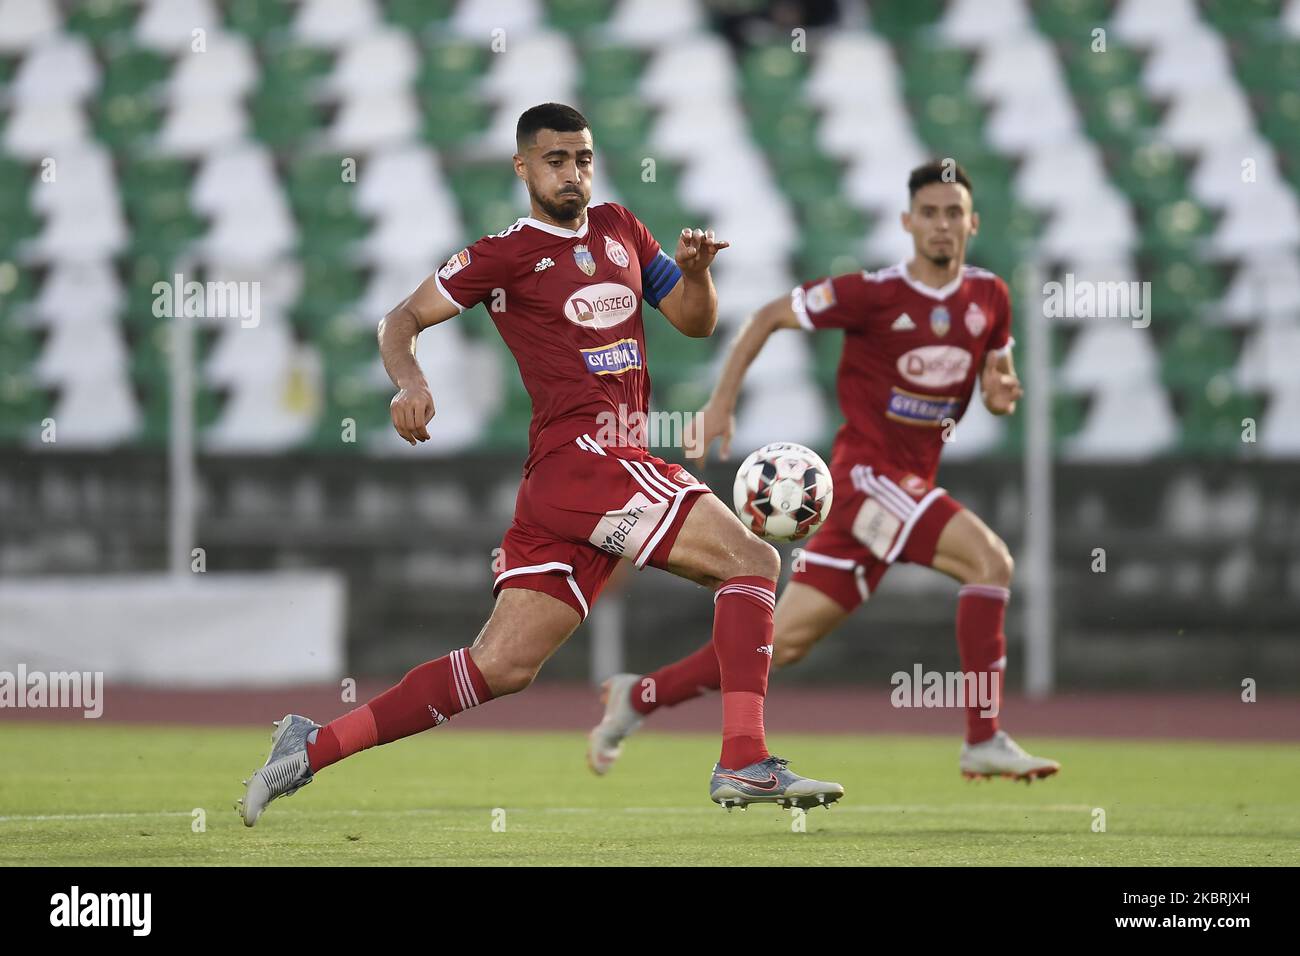 Rachid Bouhenna of Sepsi OSK in action during semifinal of the Romanian Cup  edition 2019-20